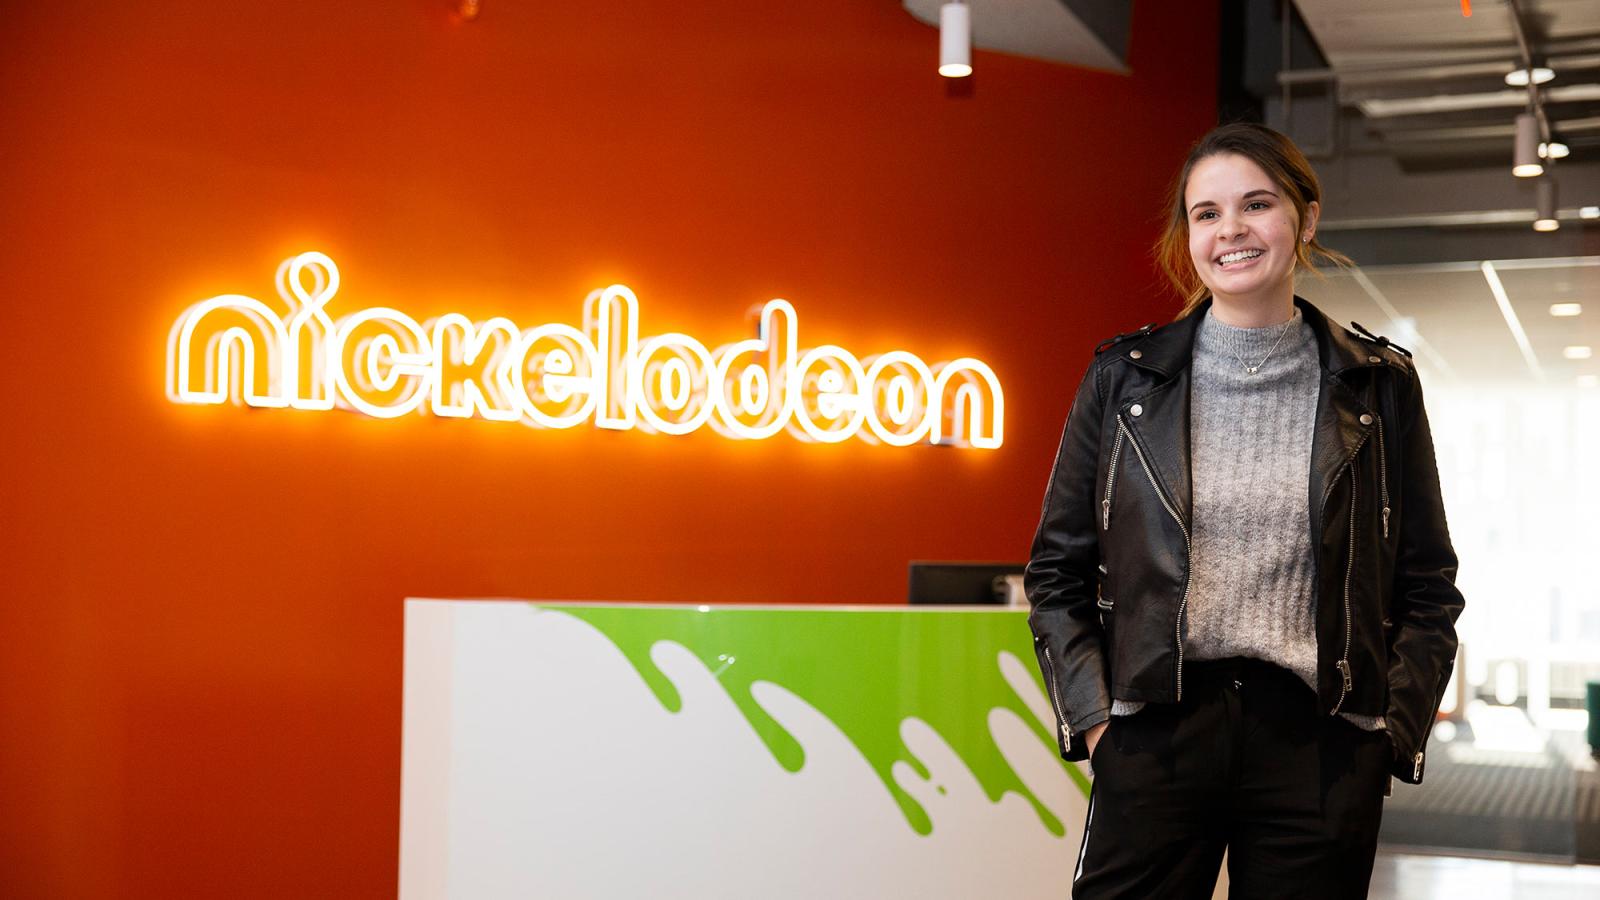 Pace University student intern standing in front of the Nickelodeon sign.